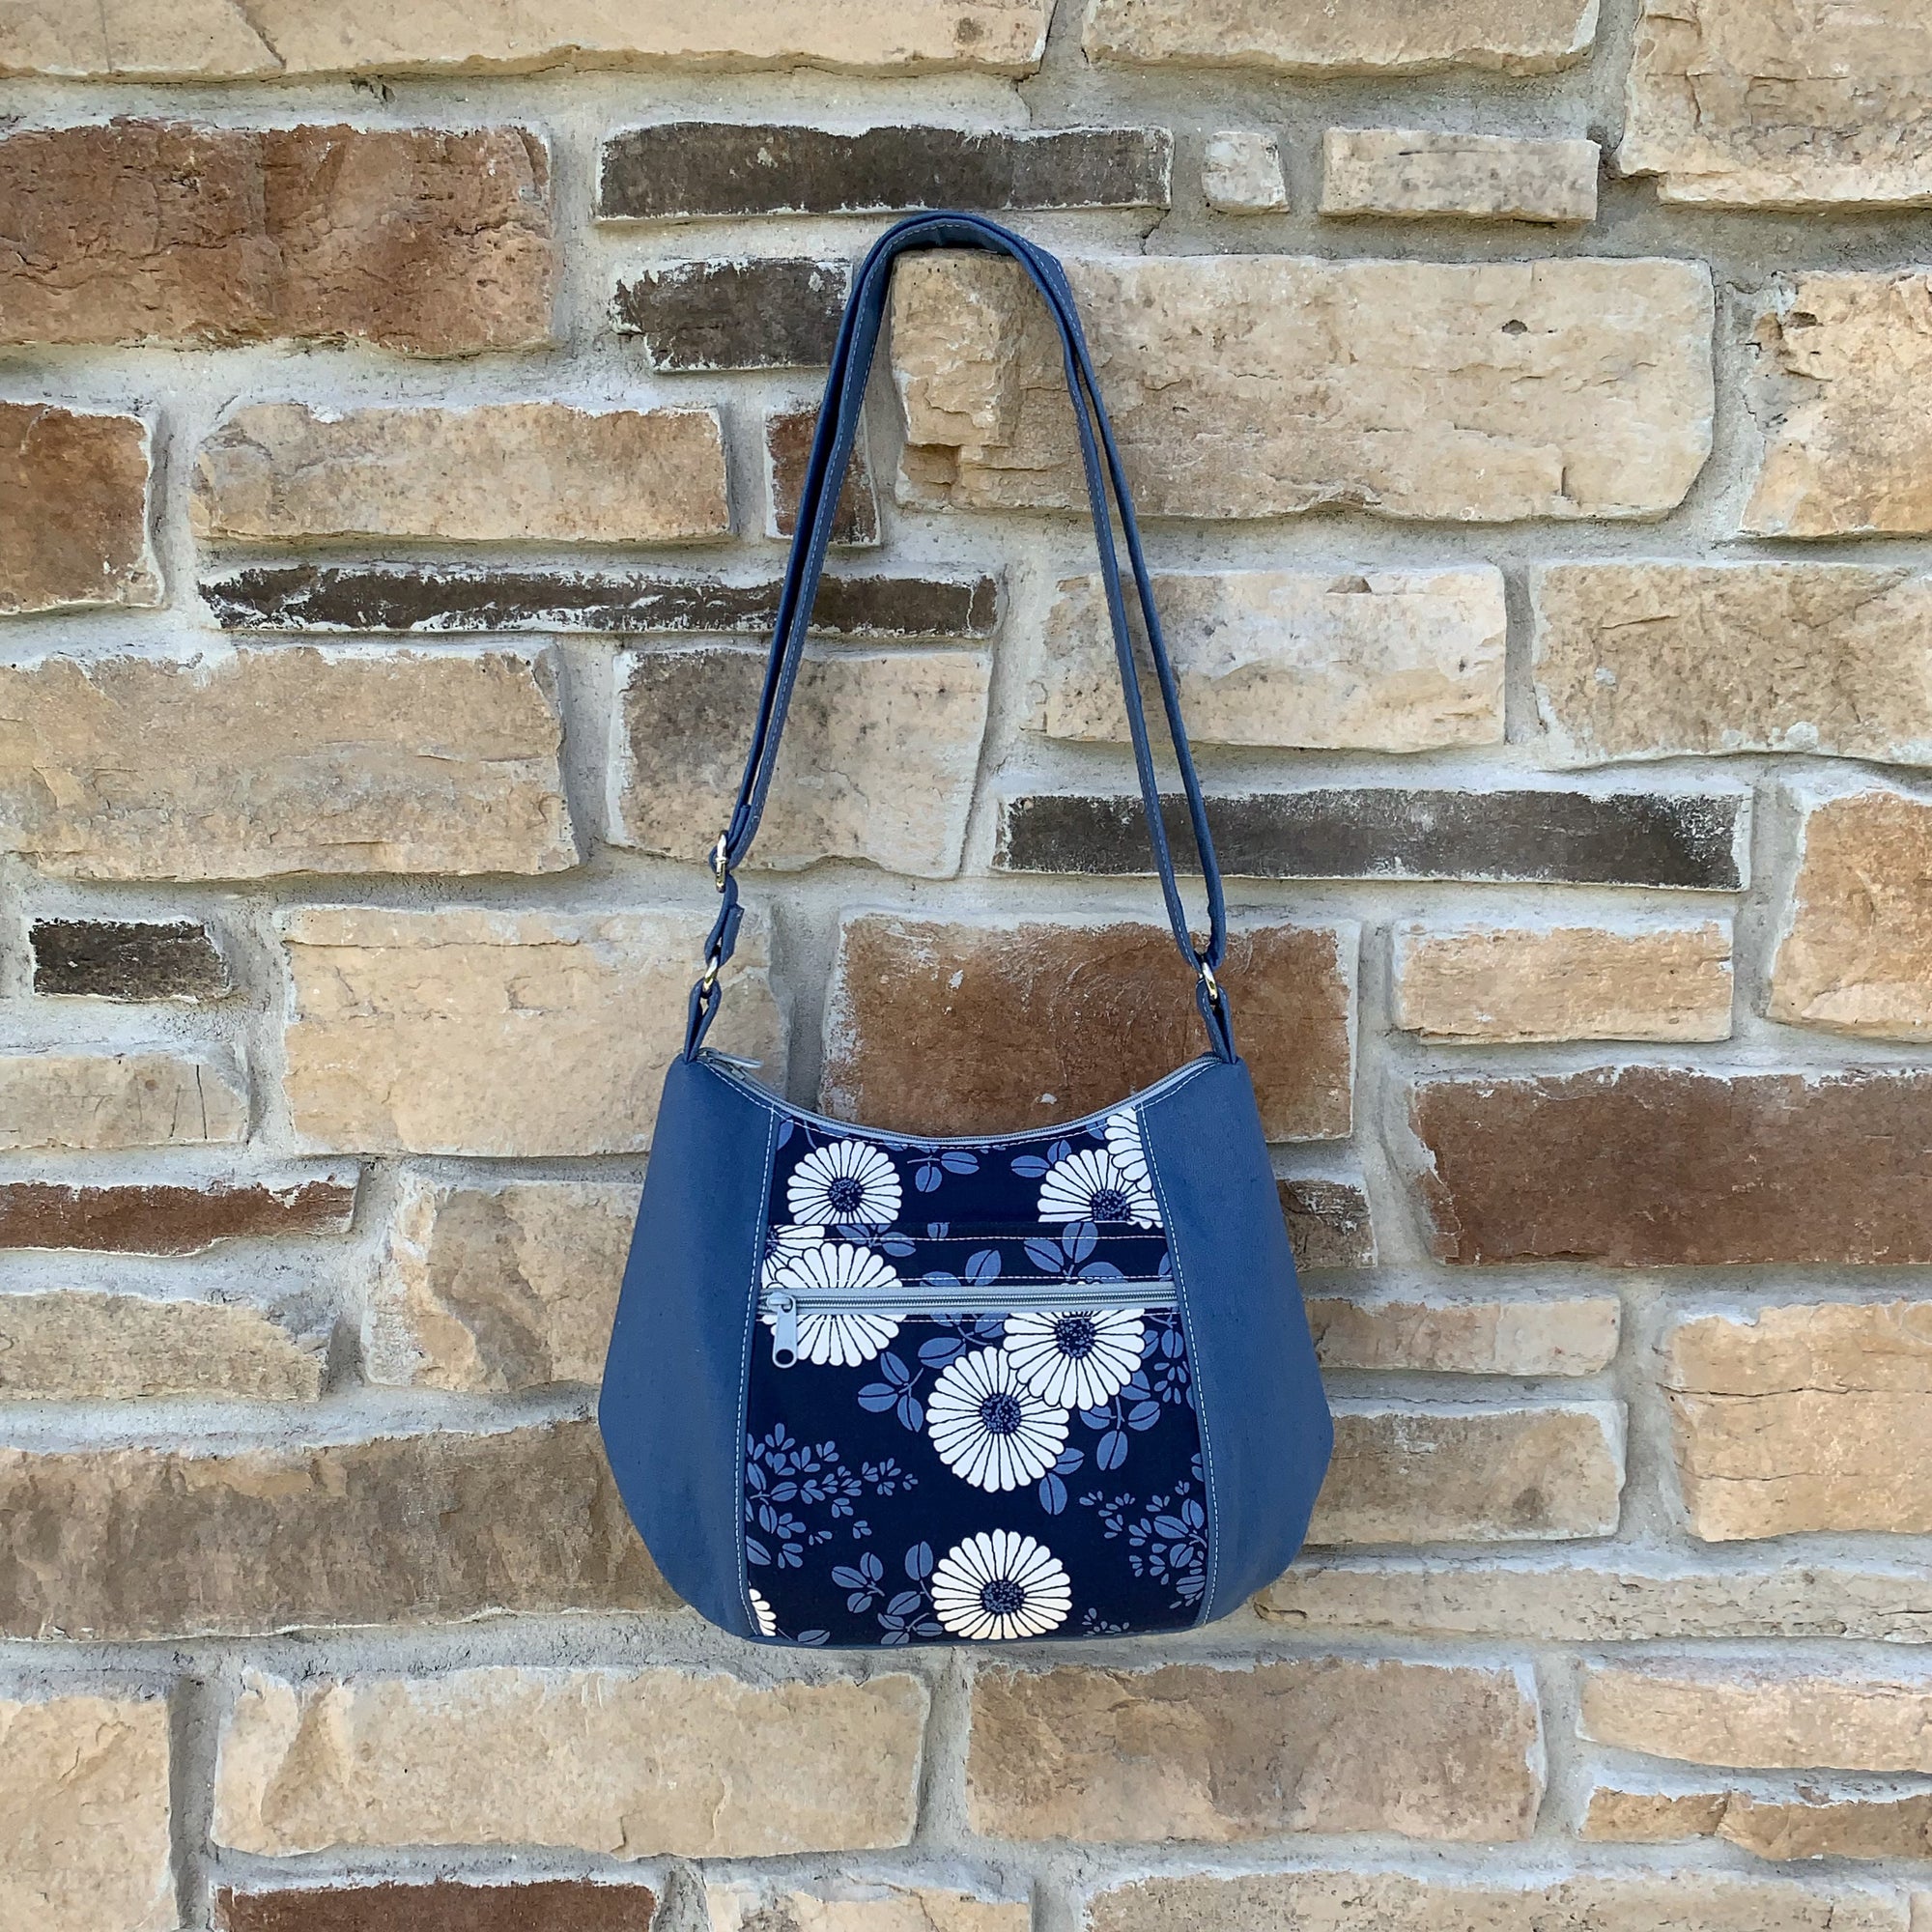 Slouch Bag Pattern Download - Sew Daily